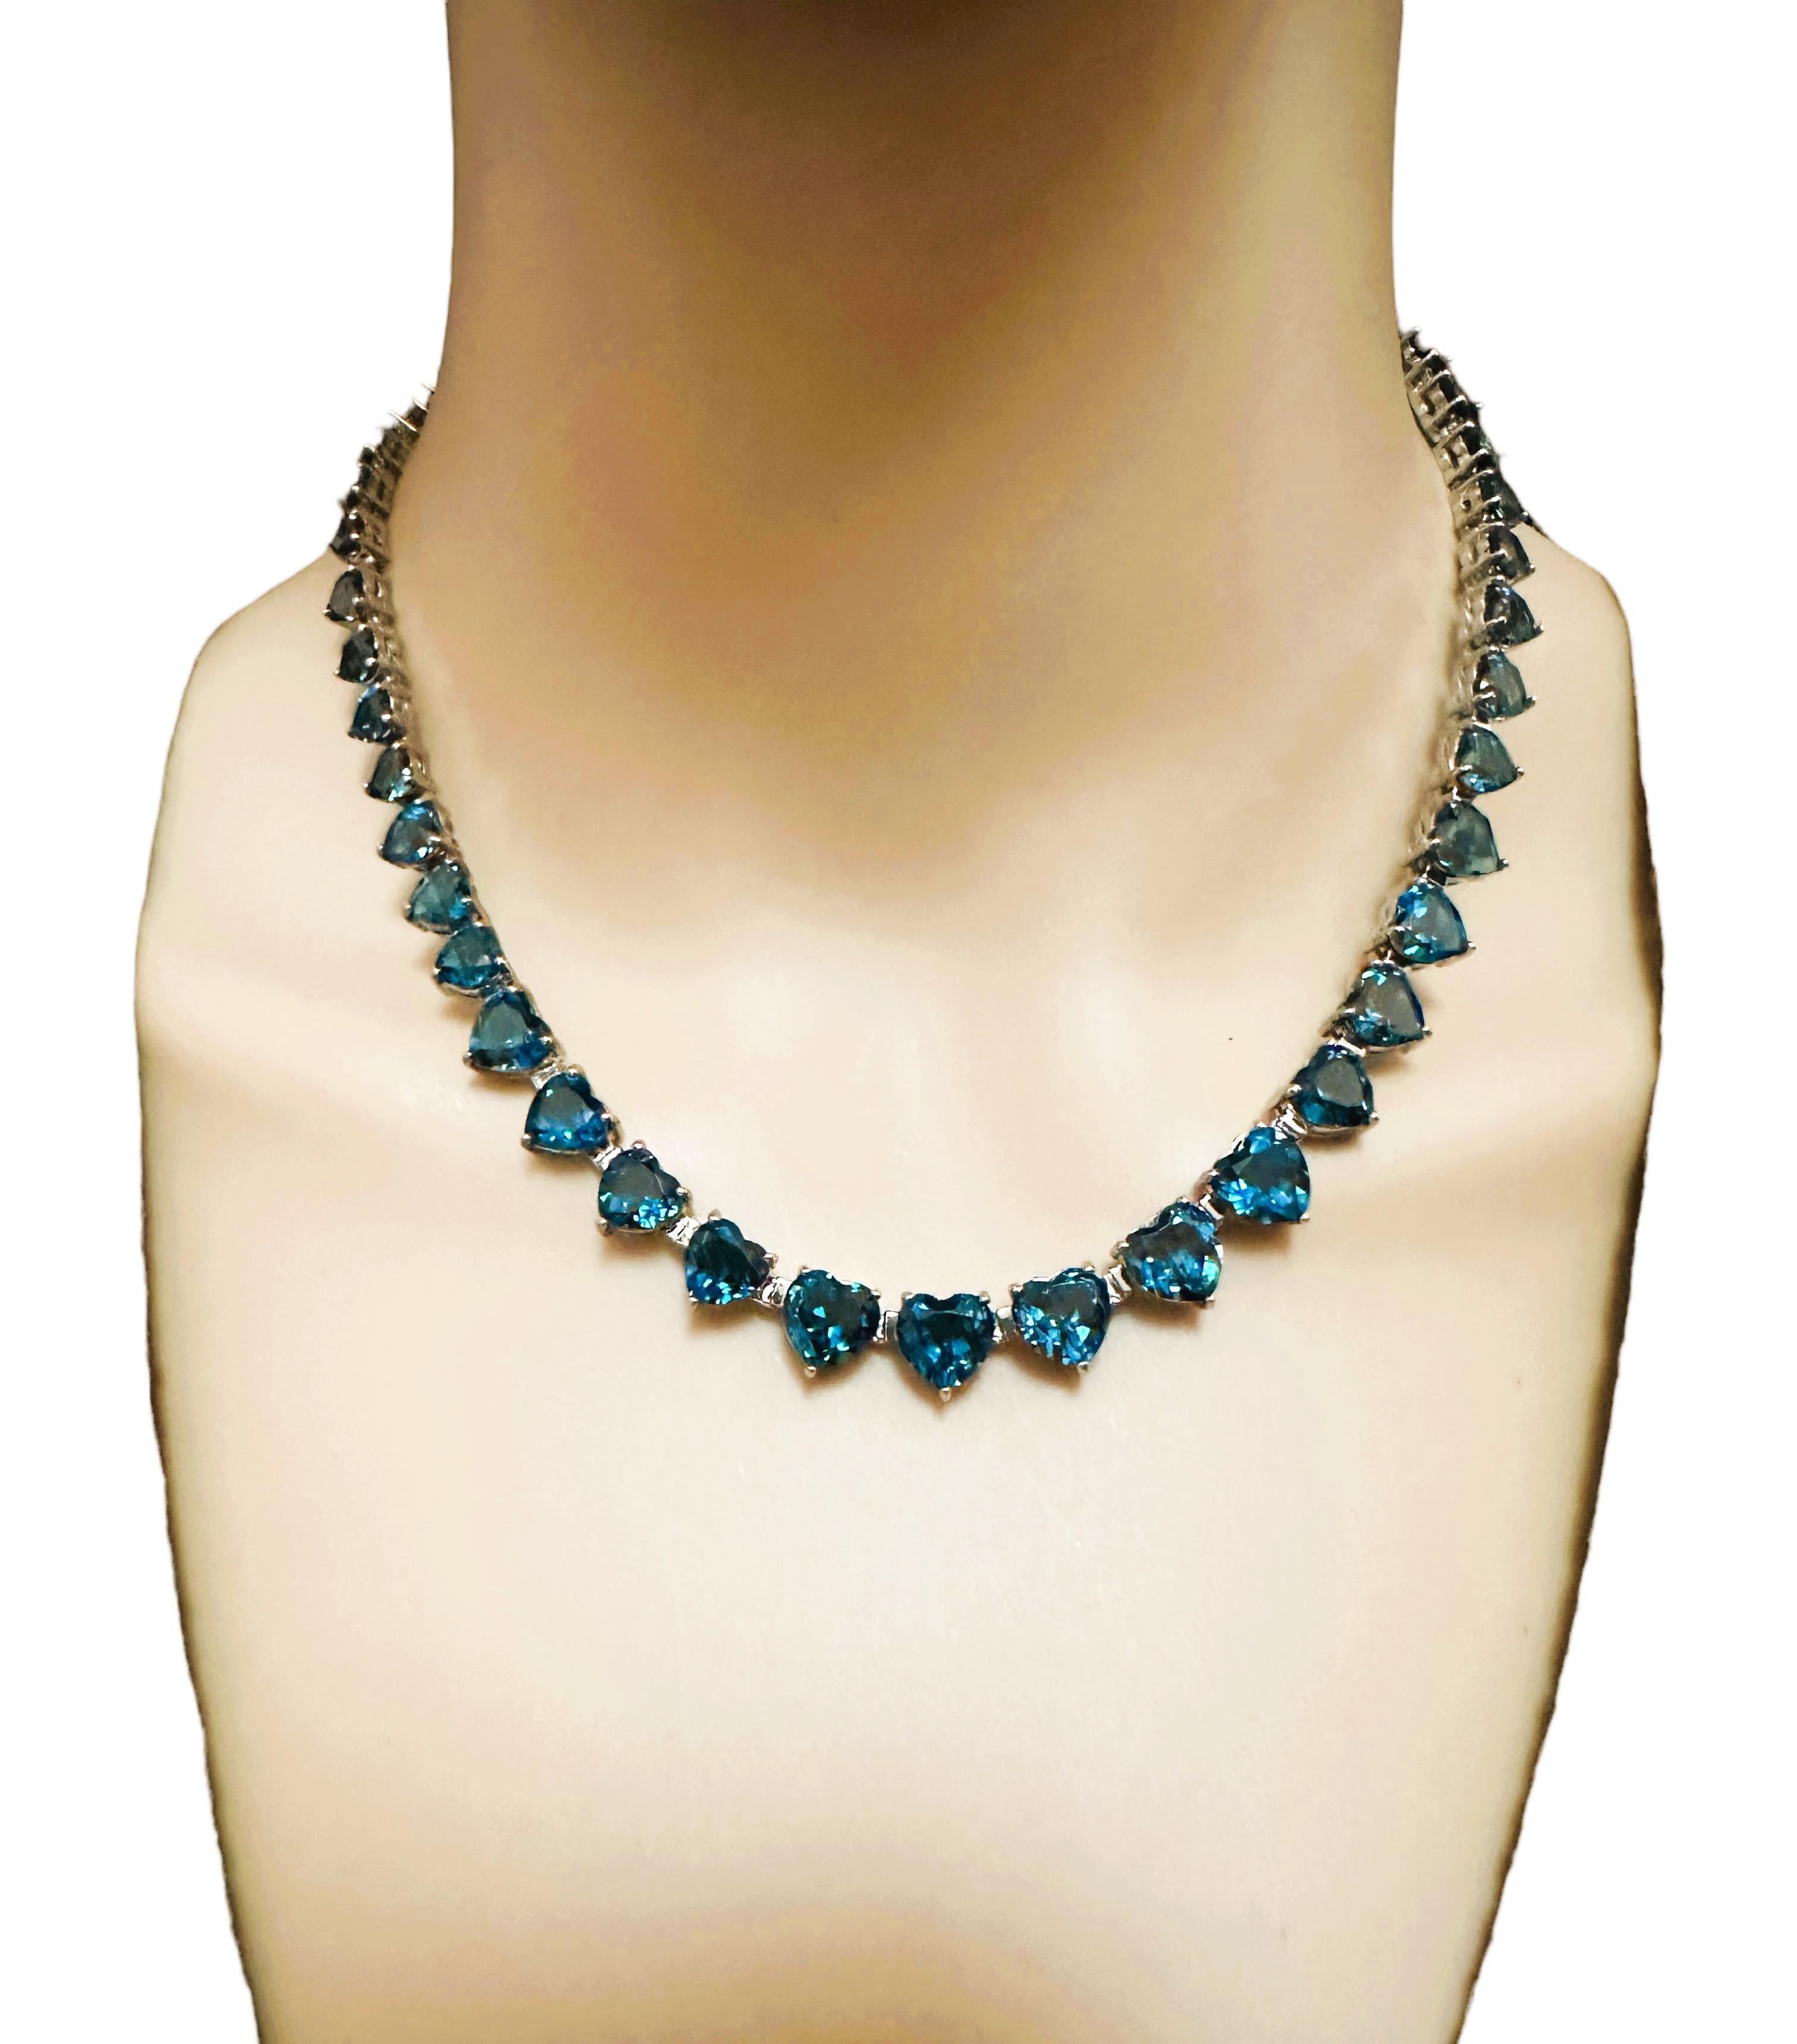 This is just in time for Valentine's Day or an Anniversary or Birthday.  The beautiful London Blue Topaz stones are graduated  The largest being 8.3 x 7.5 mm down to 4.4 x 3.5 mm.  My guess is that this is over 50 cts of Topaz.  The necklace is